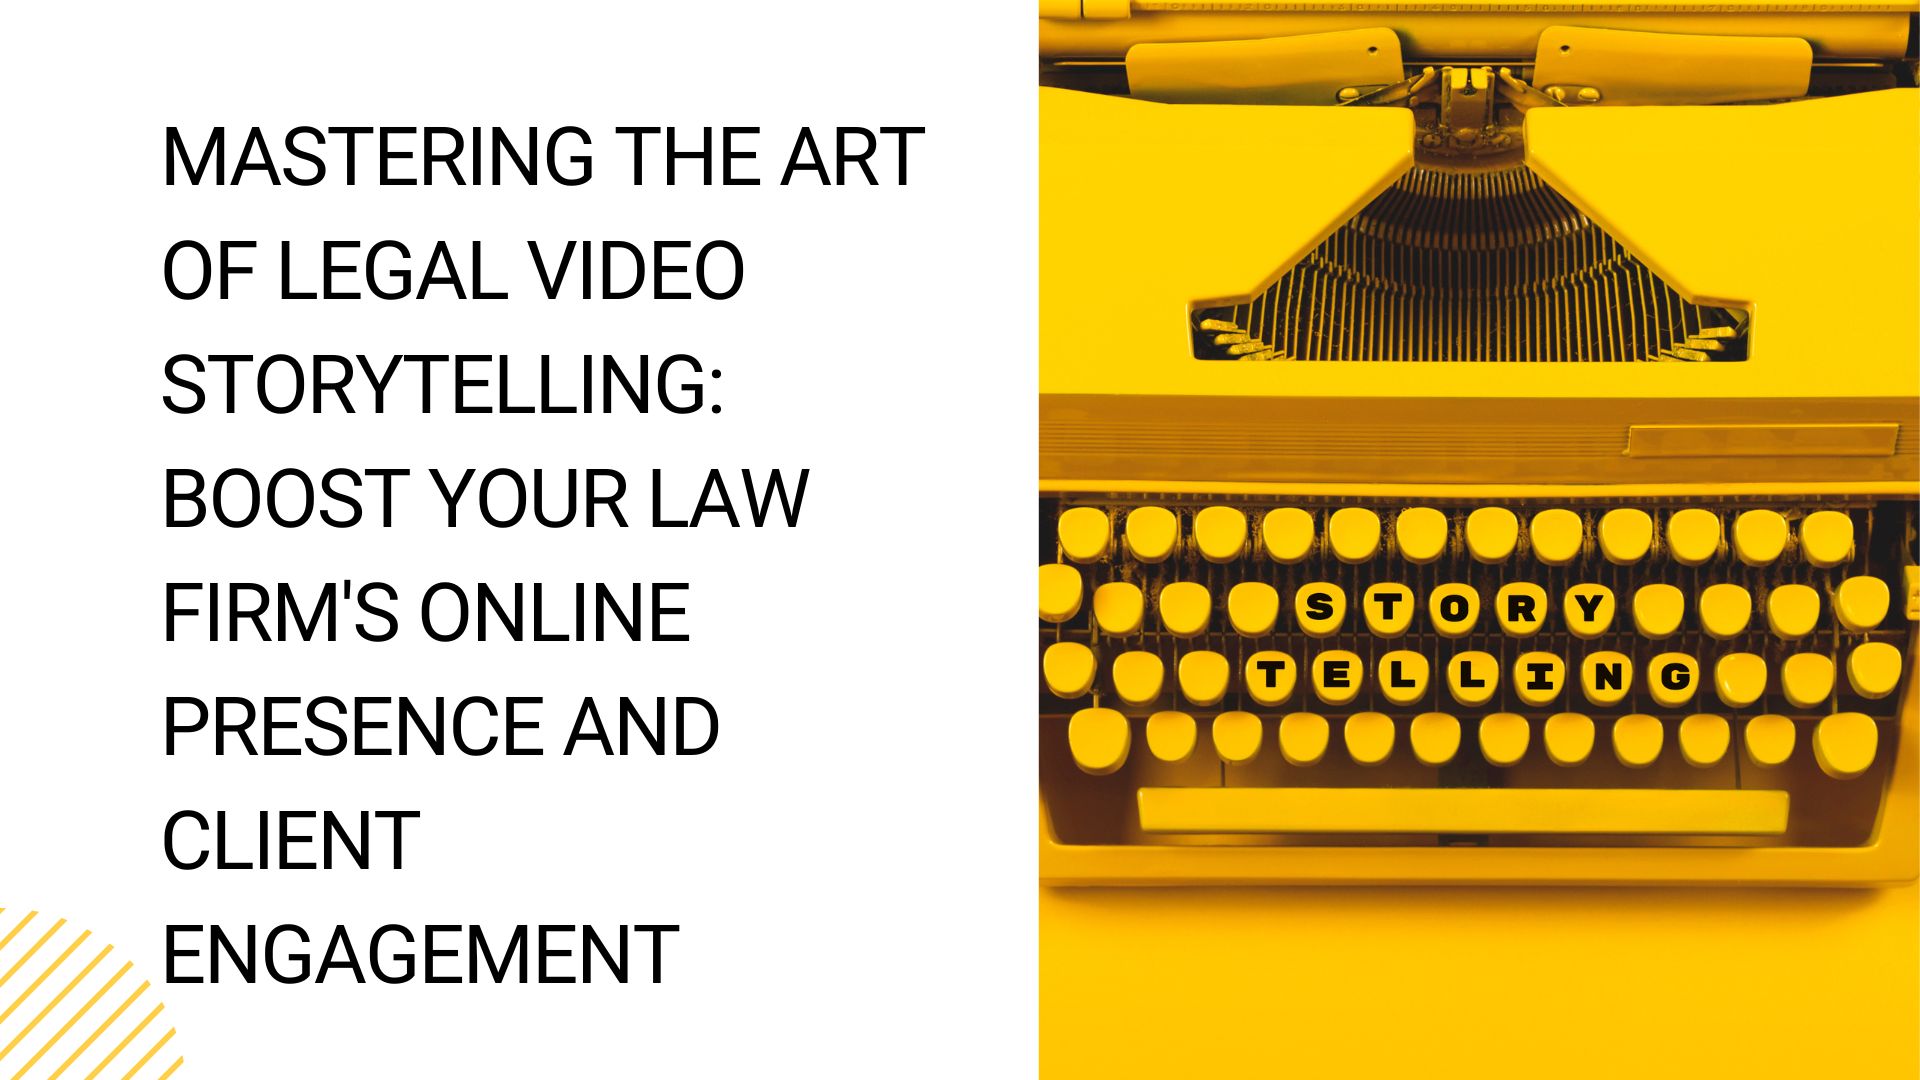 Mastering the Art of Legal Video Storytelling: Boost Your Law Firm’s Online Presence and Client Engagement